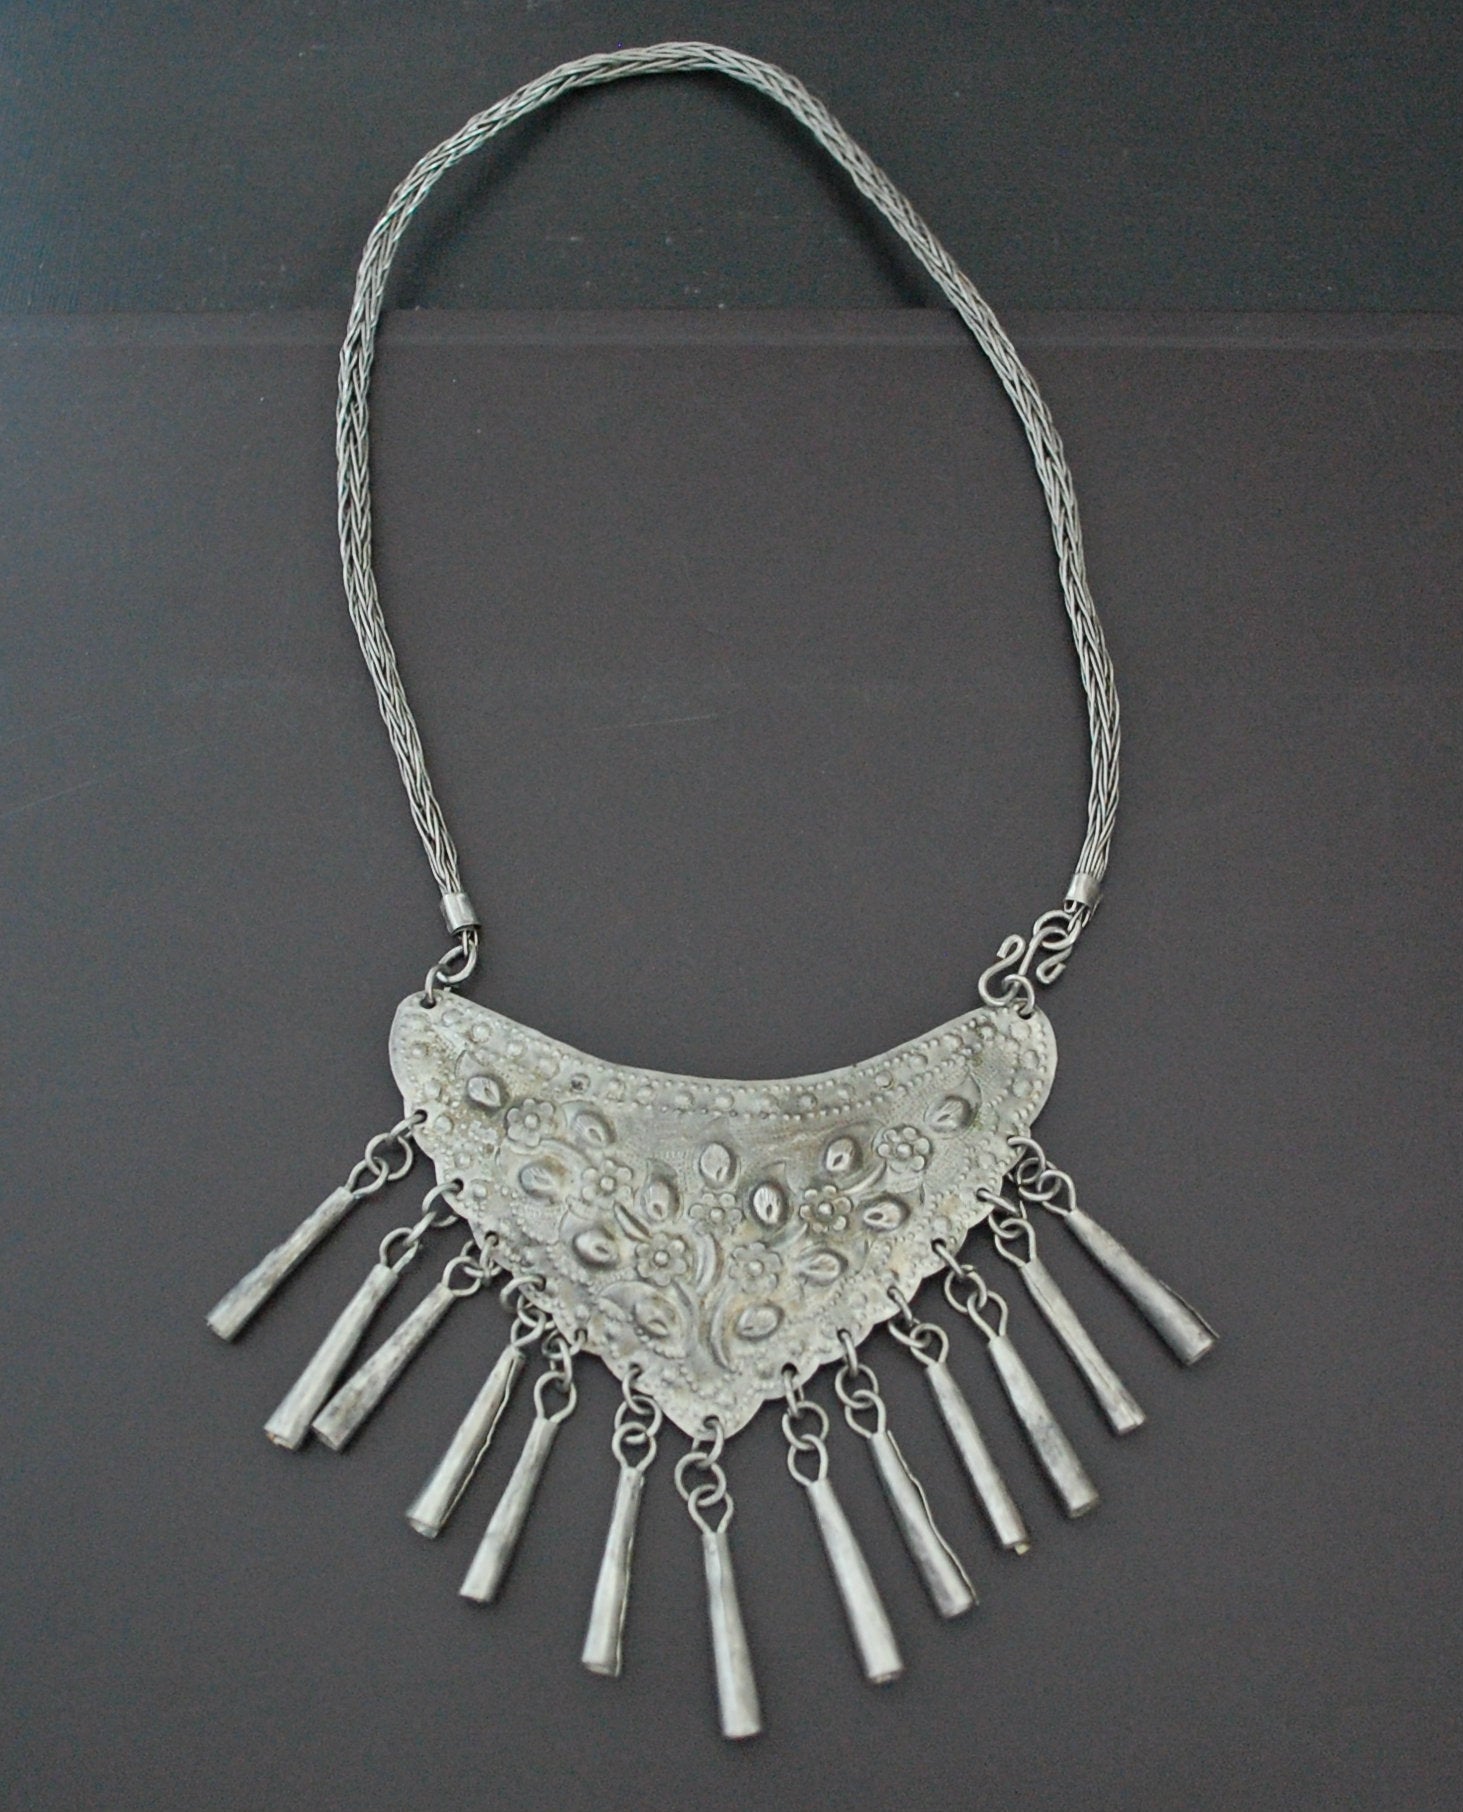 Hill Tribe Northern Vietnam Repoussee Necklace - Choker Length